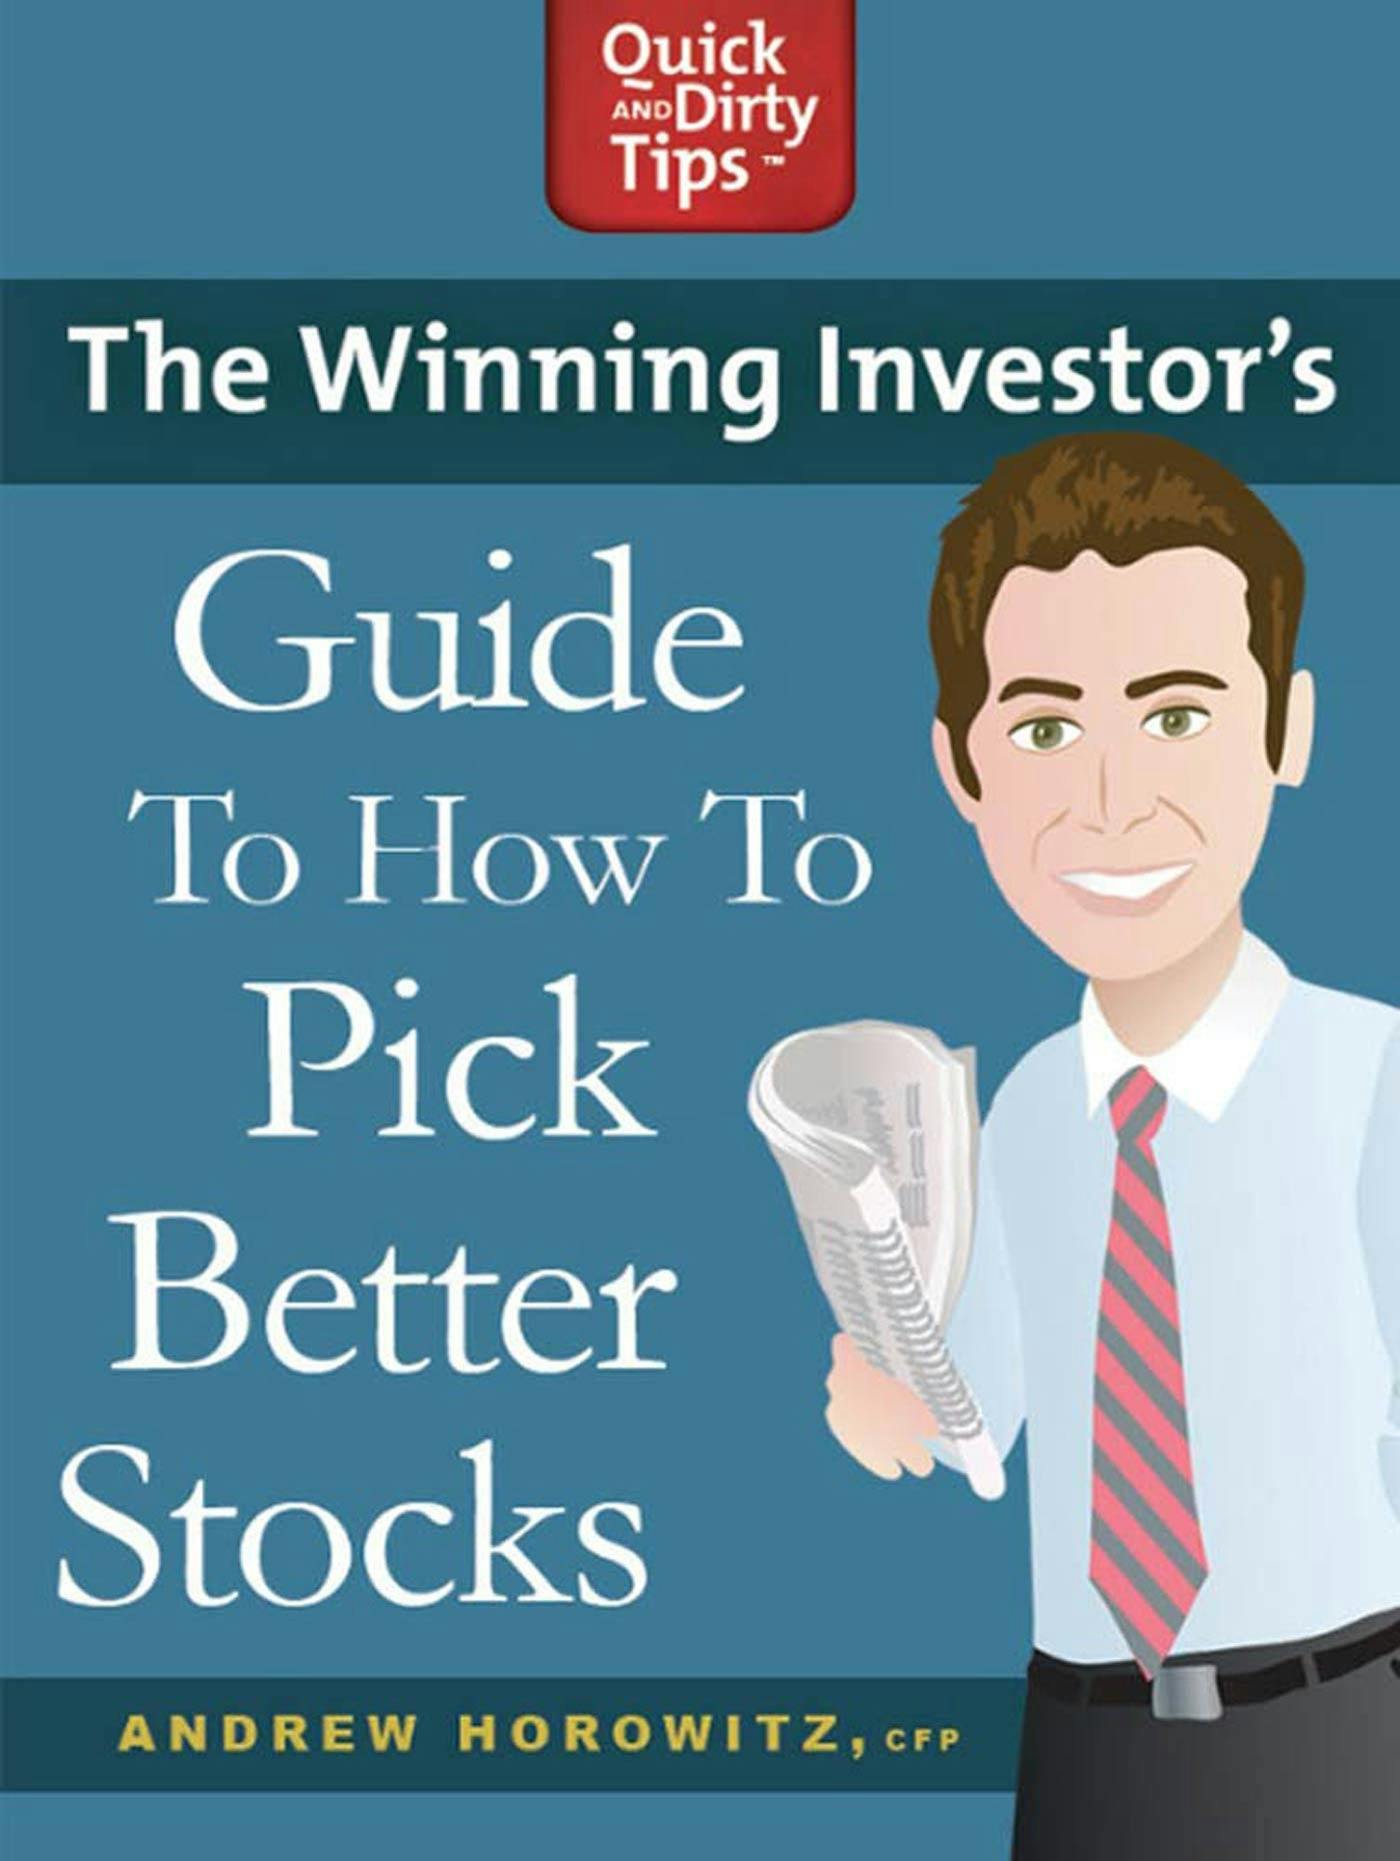 The Winning Investor's Guide to How to Pick Better Stocks